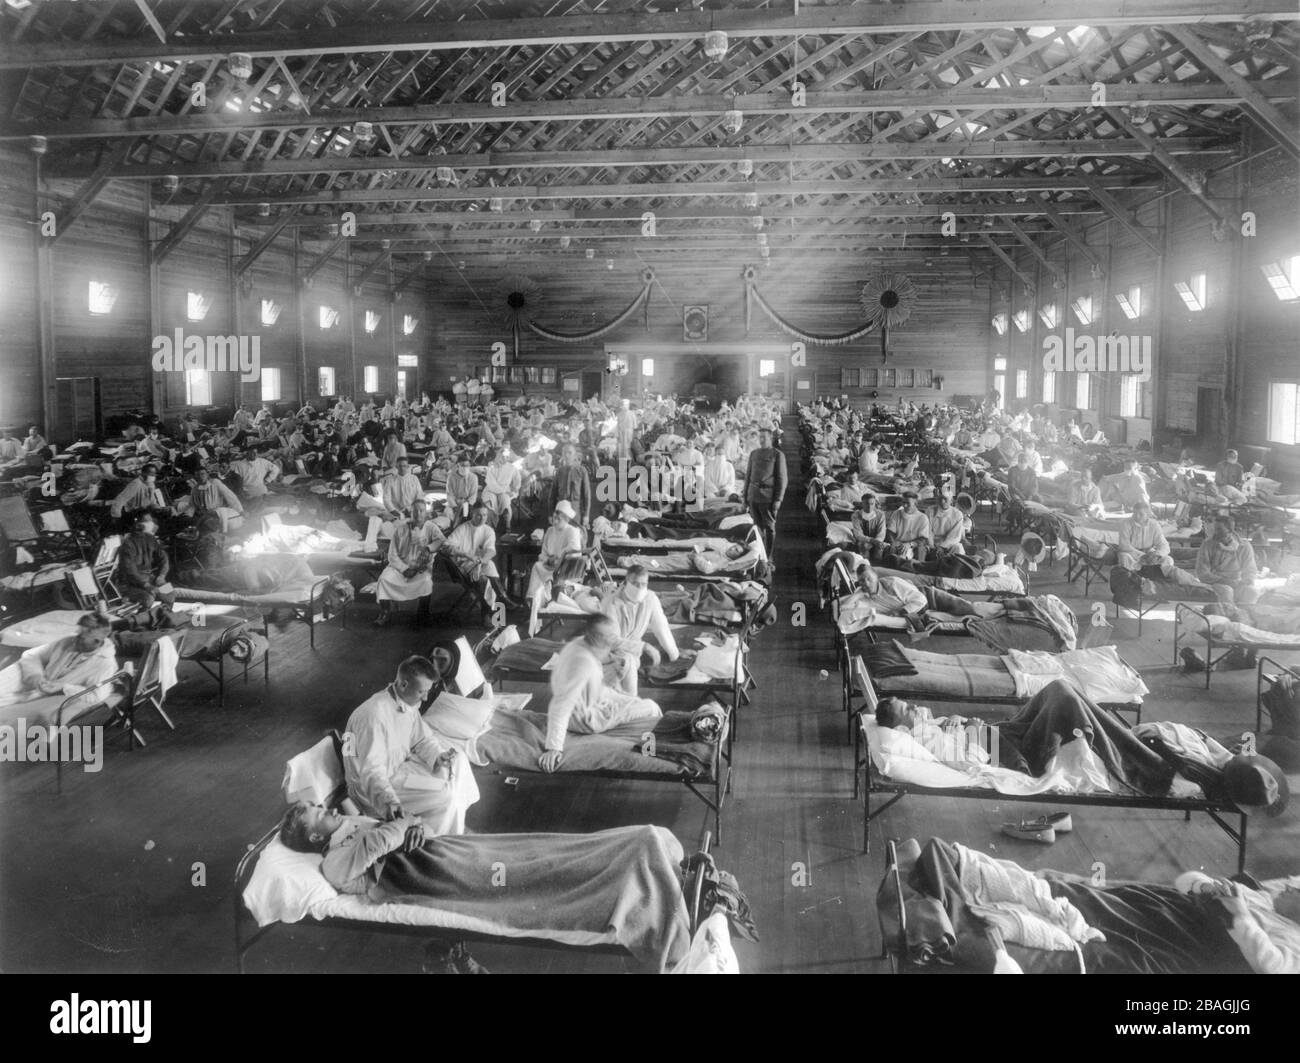 1918 influenza pandemic, Spanish Flu. Soldiers from Fort Riley, Kansas, ill with Spanish flu at a hospital ward at Camp Funston Emergency hospital during influenza epidemic, Camp Funston, Kansas. 1918 Stock Photo